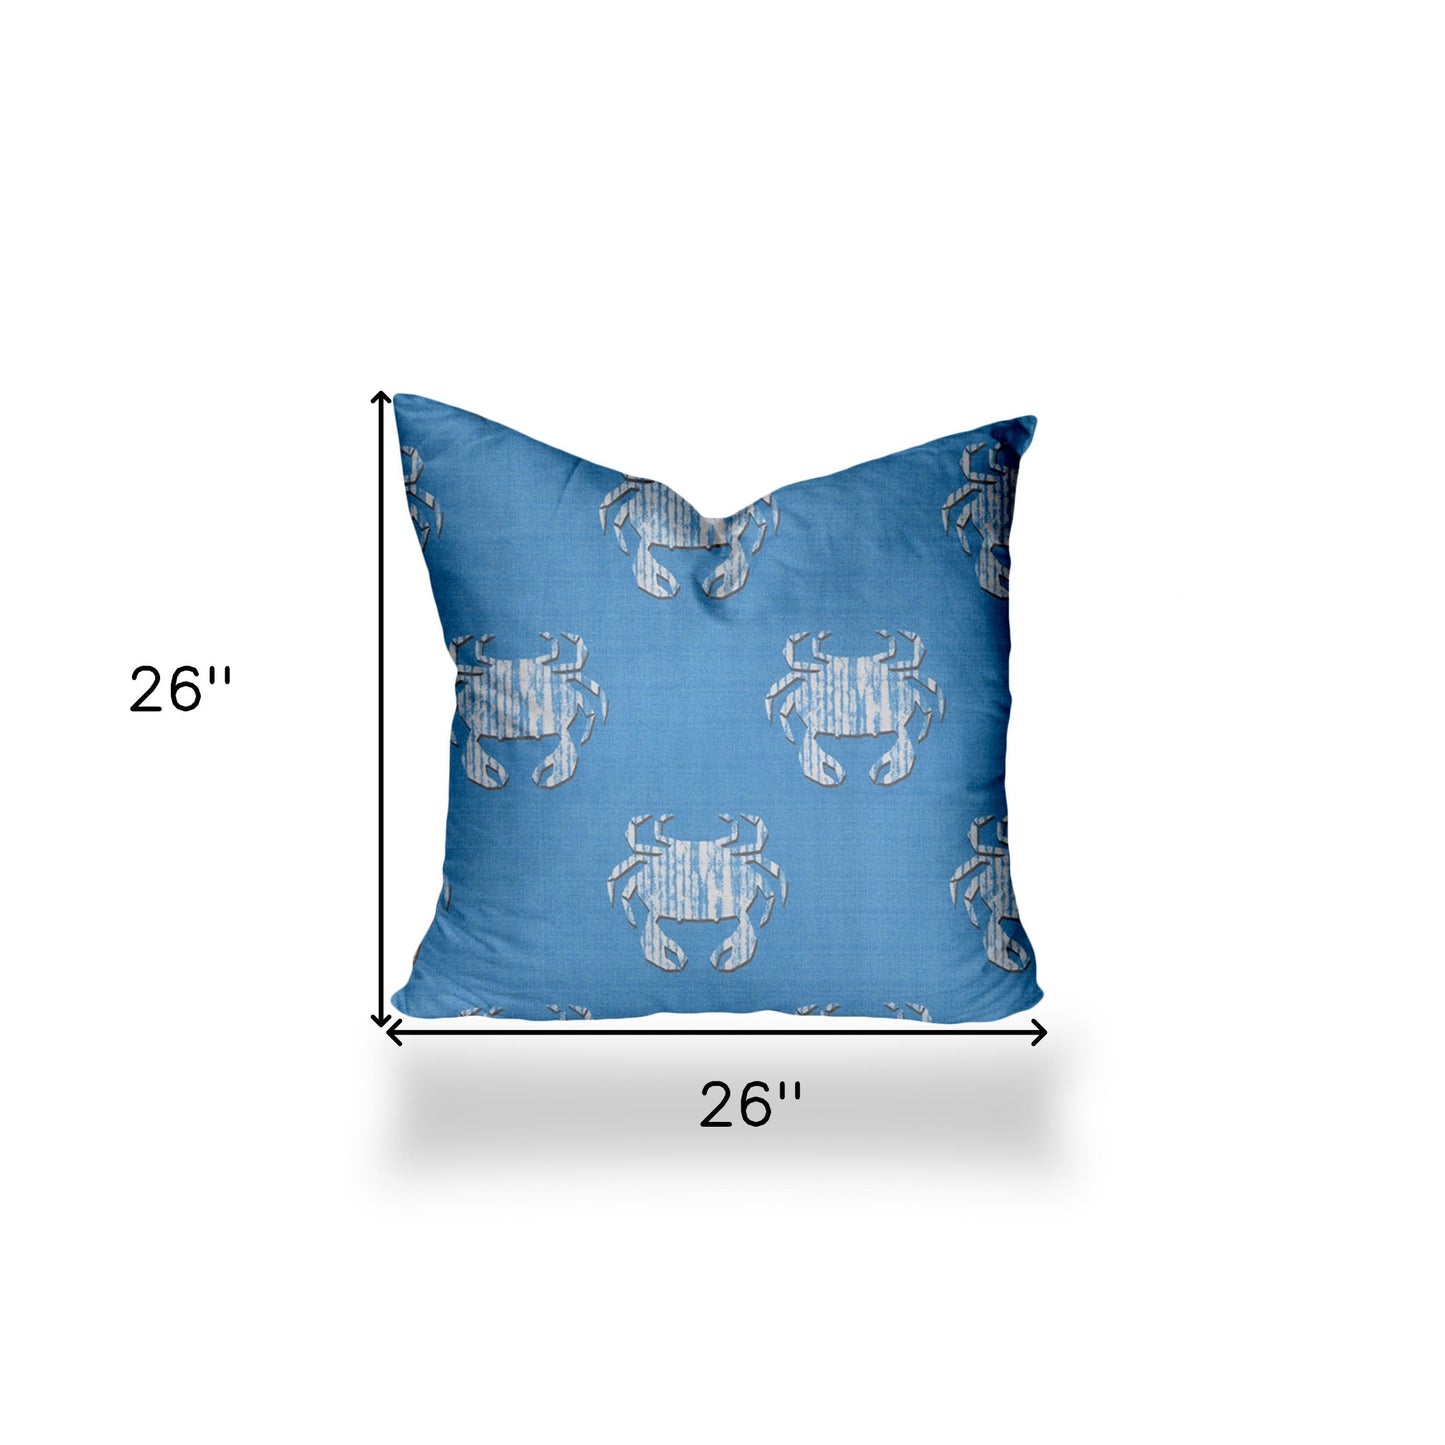 26" X 26" Blue And White Crab Enveloped Coastal Throw Indoor Outdoor Pillow Cover